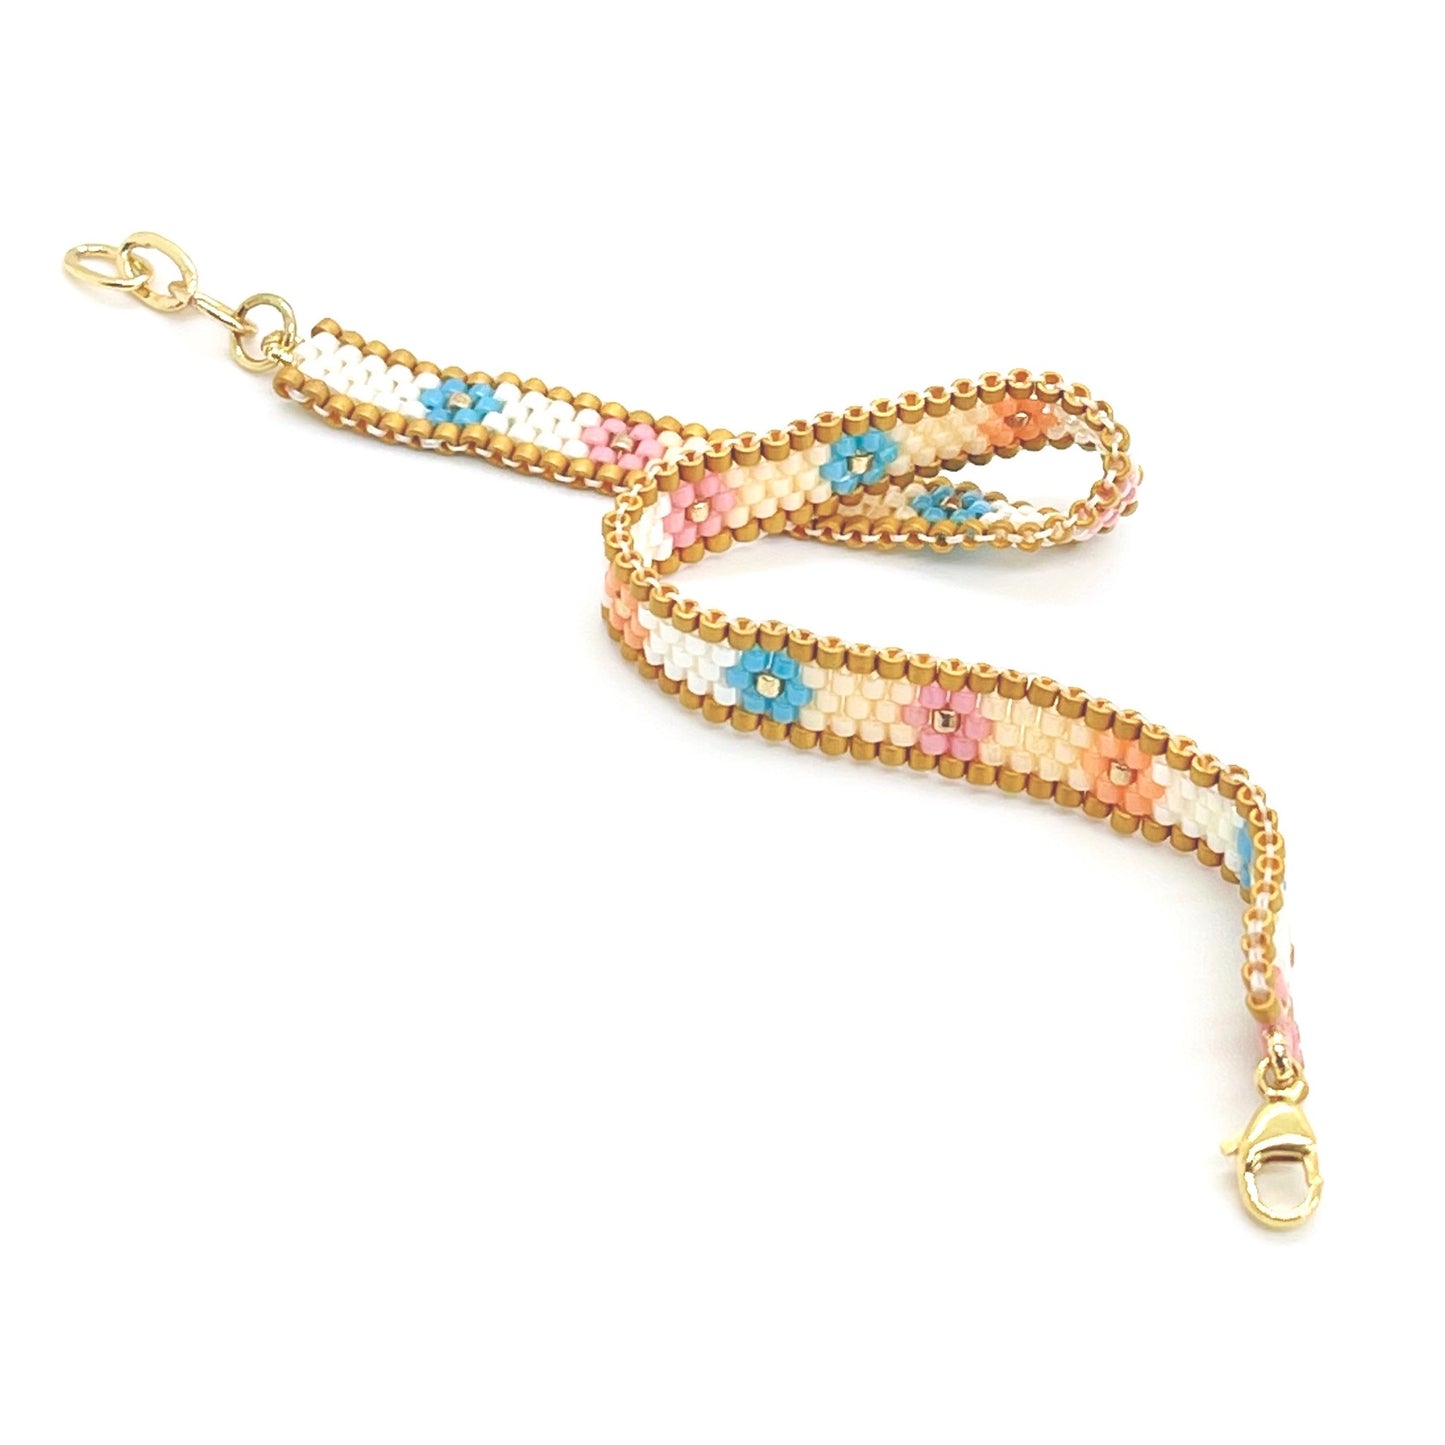 Seed bead flower bracelet with pink, blue, white , and gold beads. Flat beaded bracelet. Handmade in NYC.